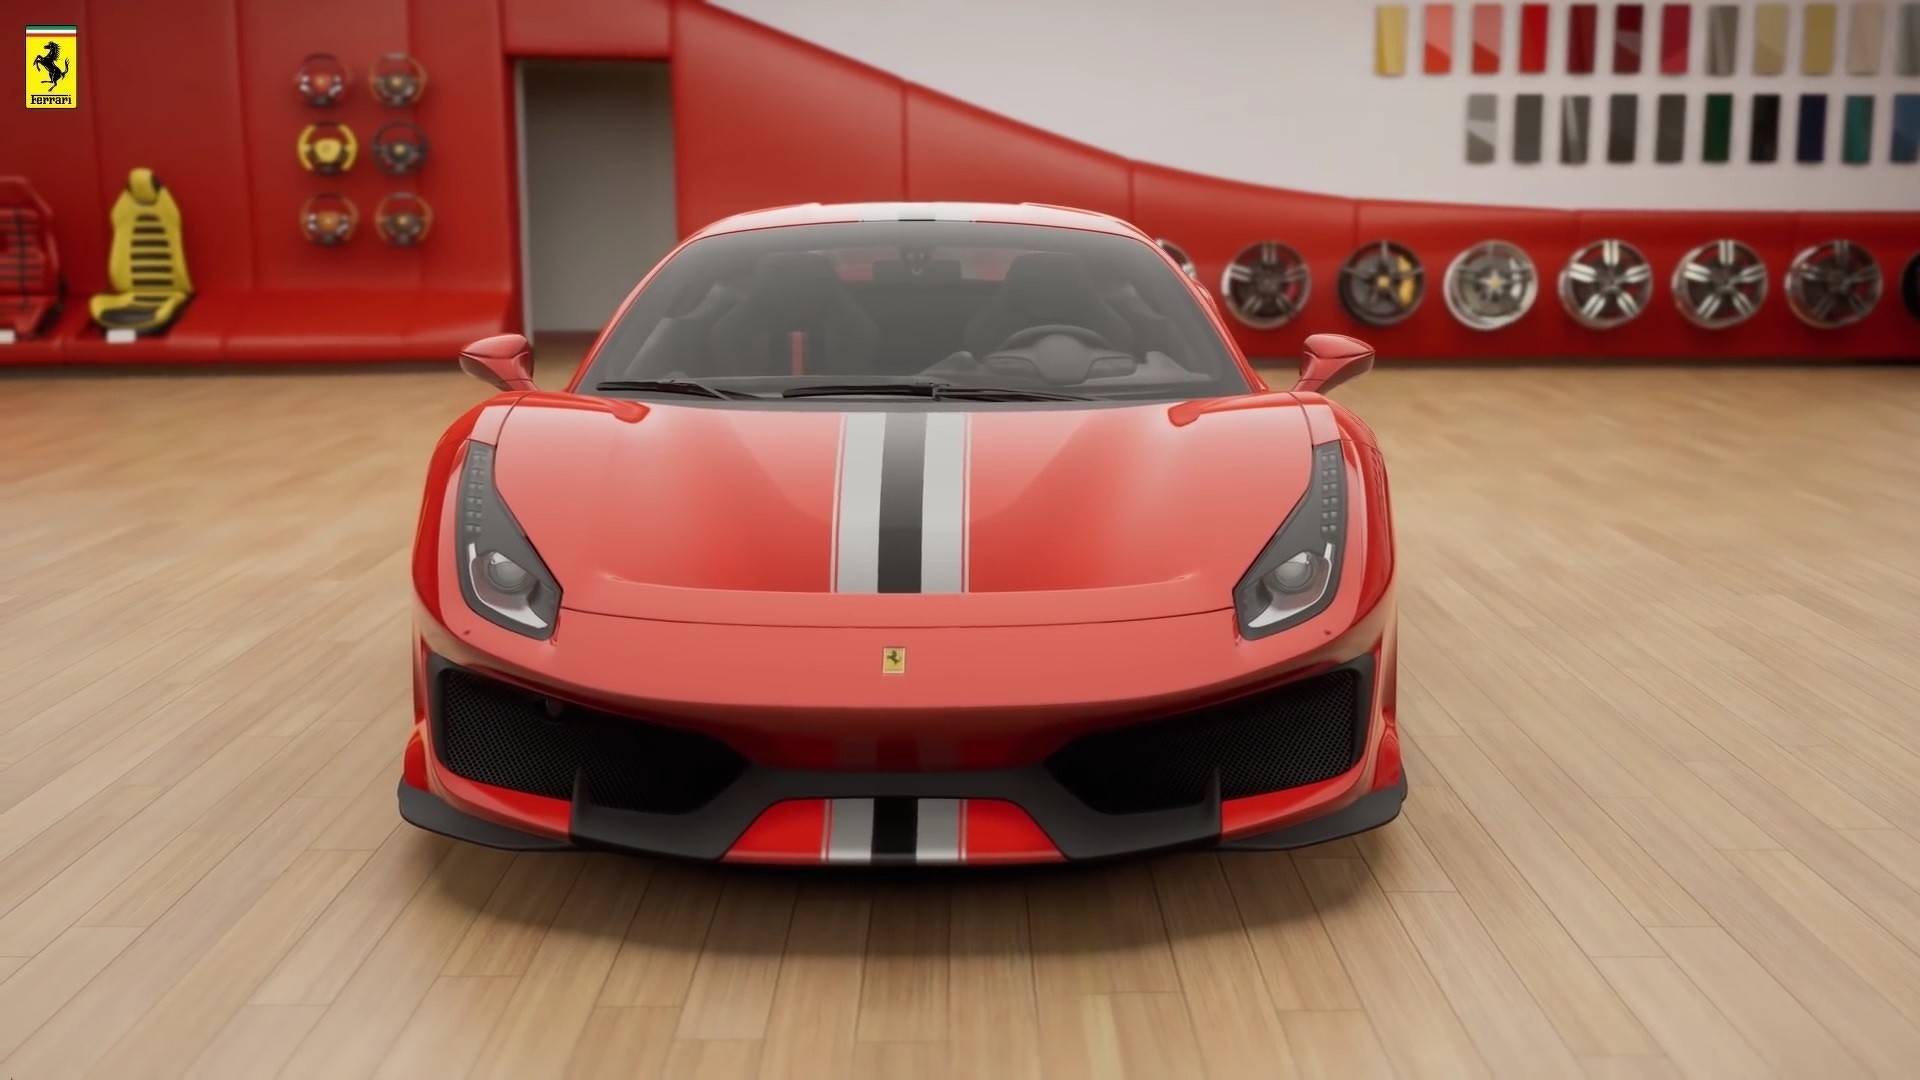 Ferrari 488 Pista Leaks Out To Reveal Its Aggressive Body